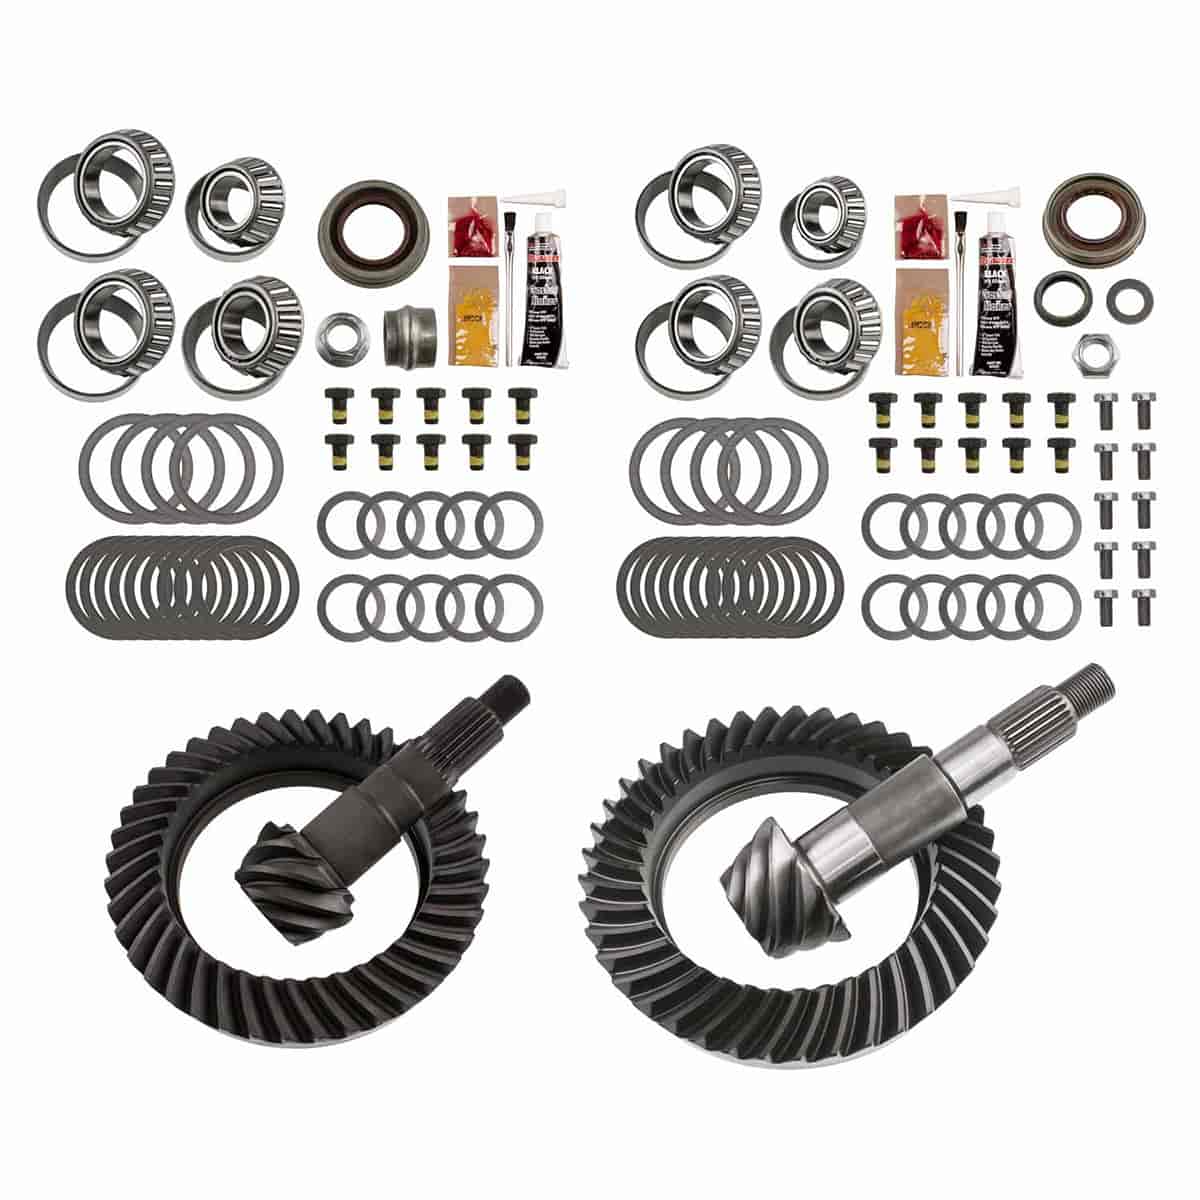 Complete Front and Rear Differential Ring & Pinion Kit 2007-2018 Jeep Wrangler JK Rubicon [Dana 44 JK, 5.13 Ratio]